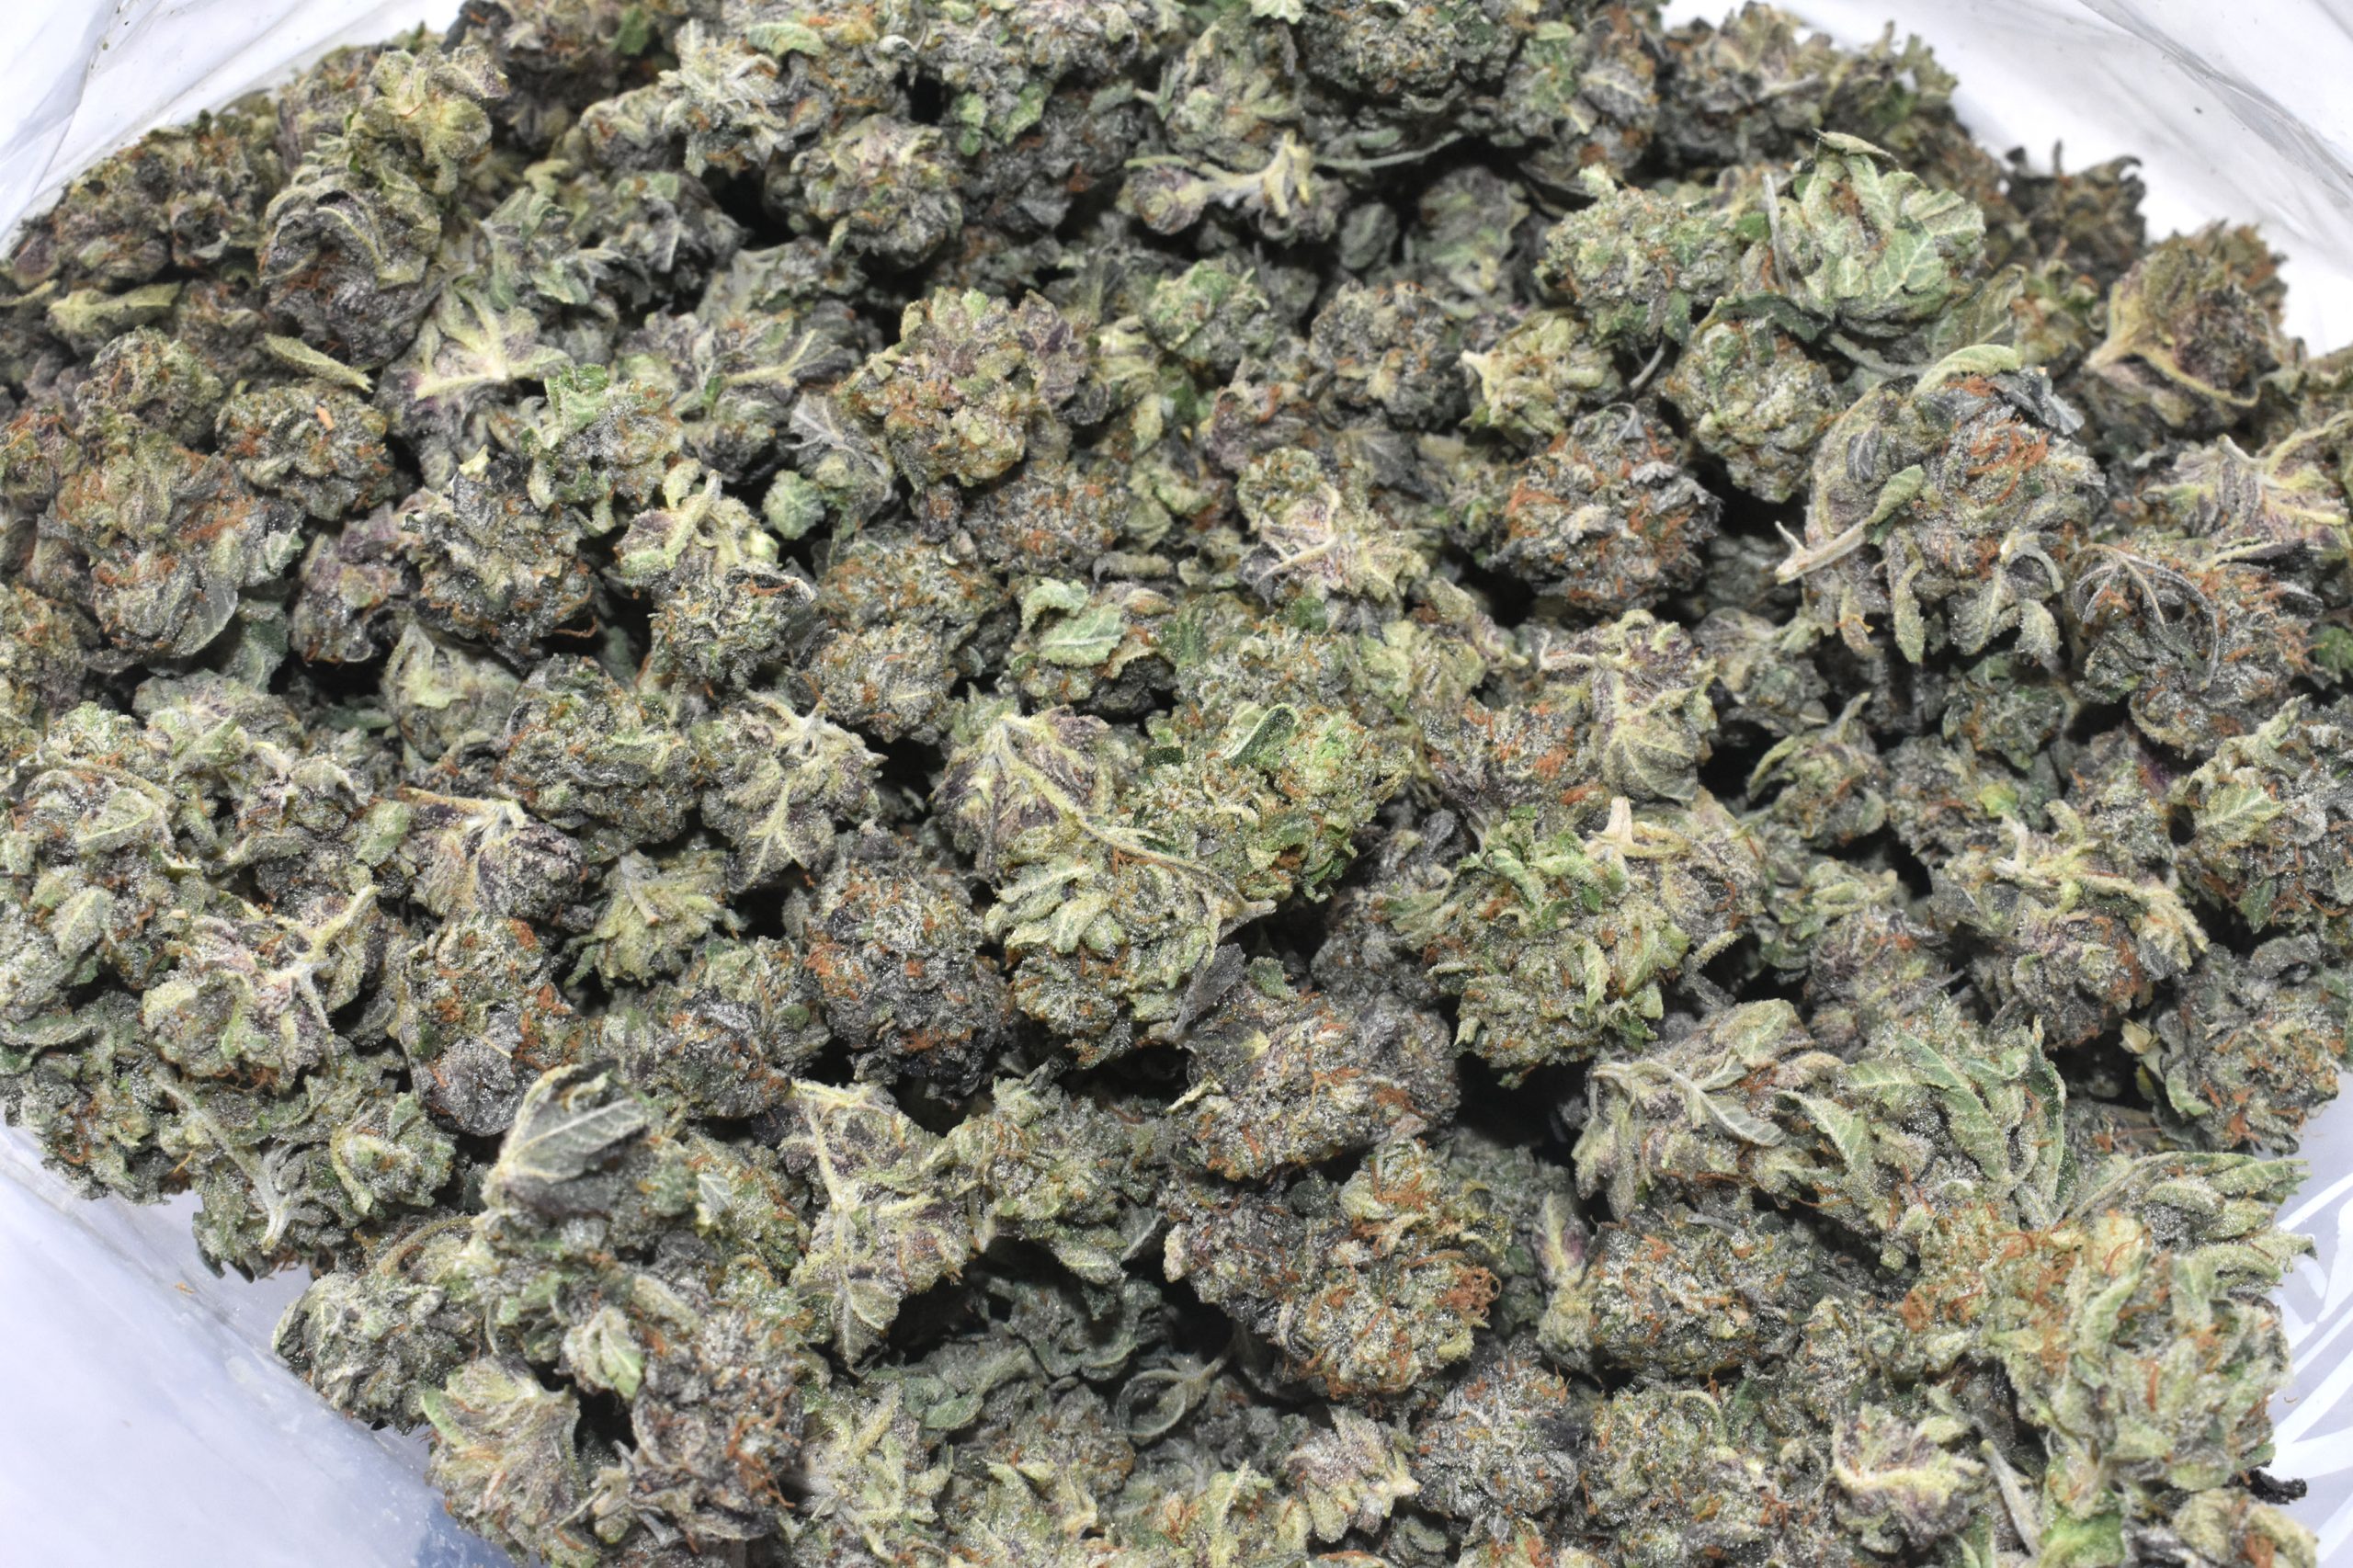 buy-purple-candy-quad-popcorns-at-chronicfarms.cc-online-weed-dispensary-in-canada